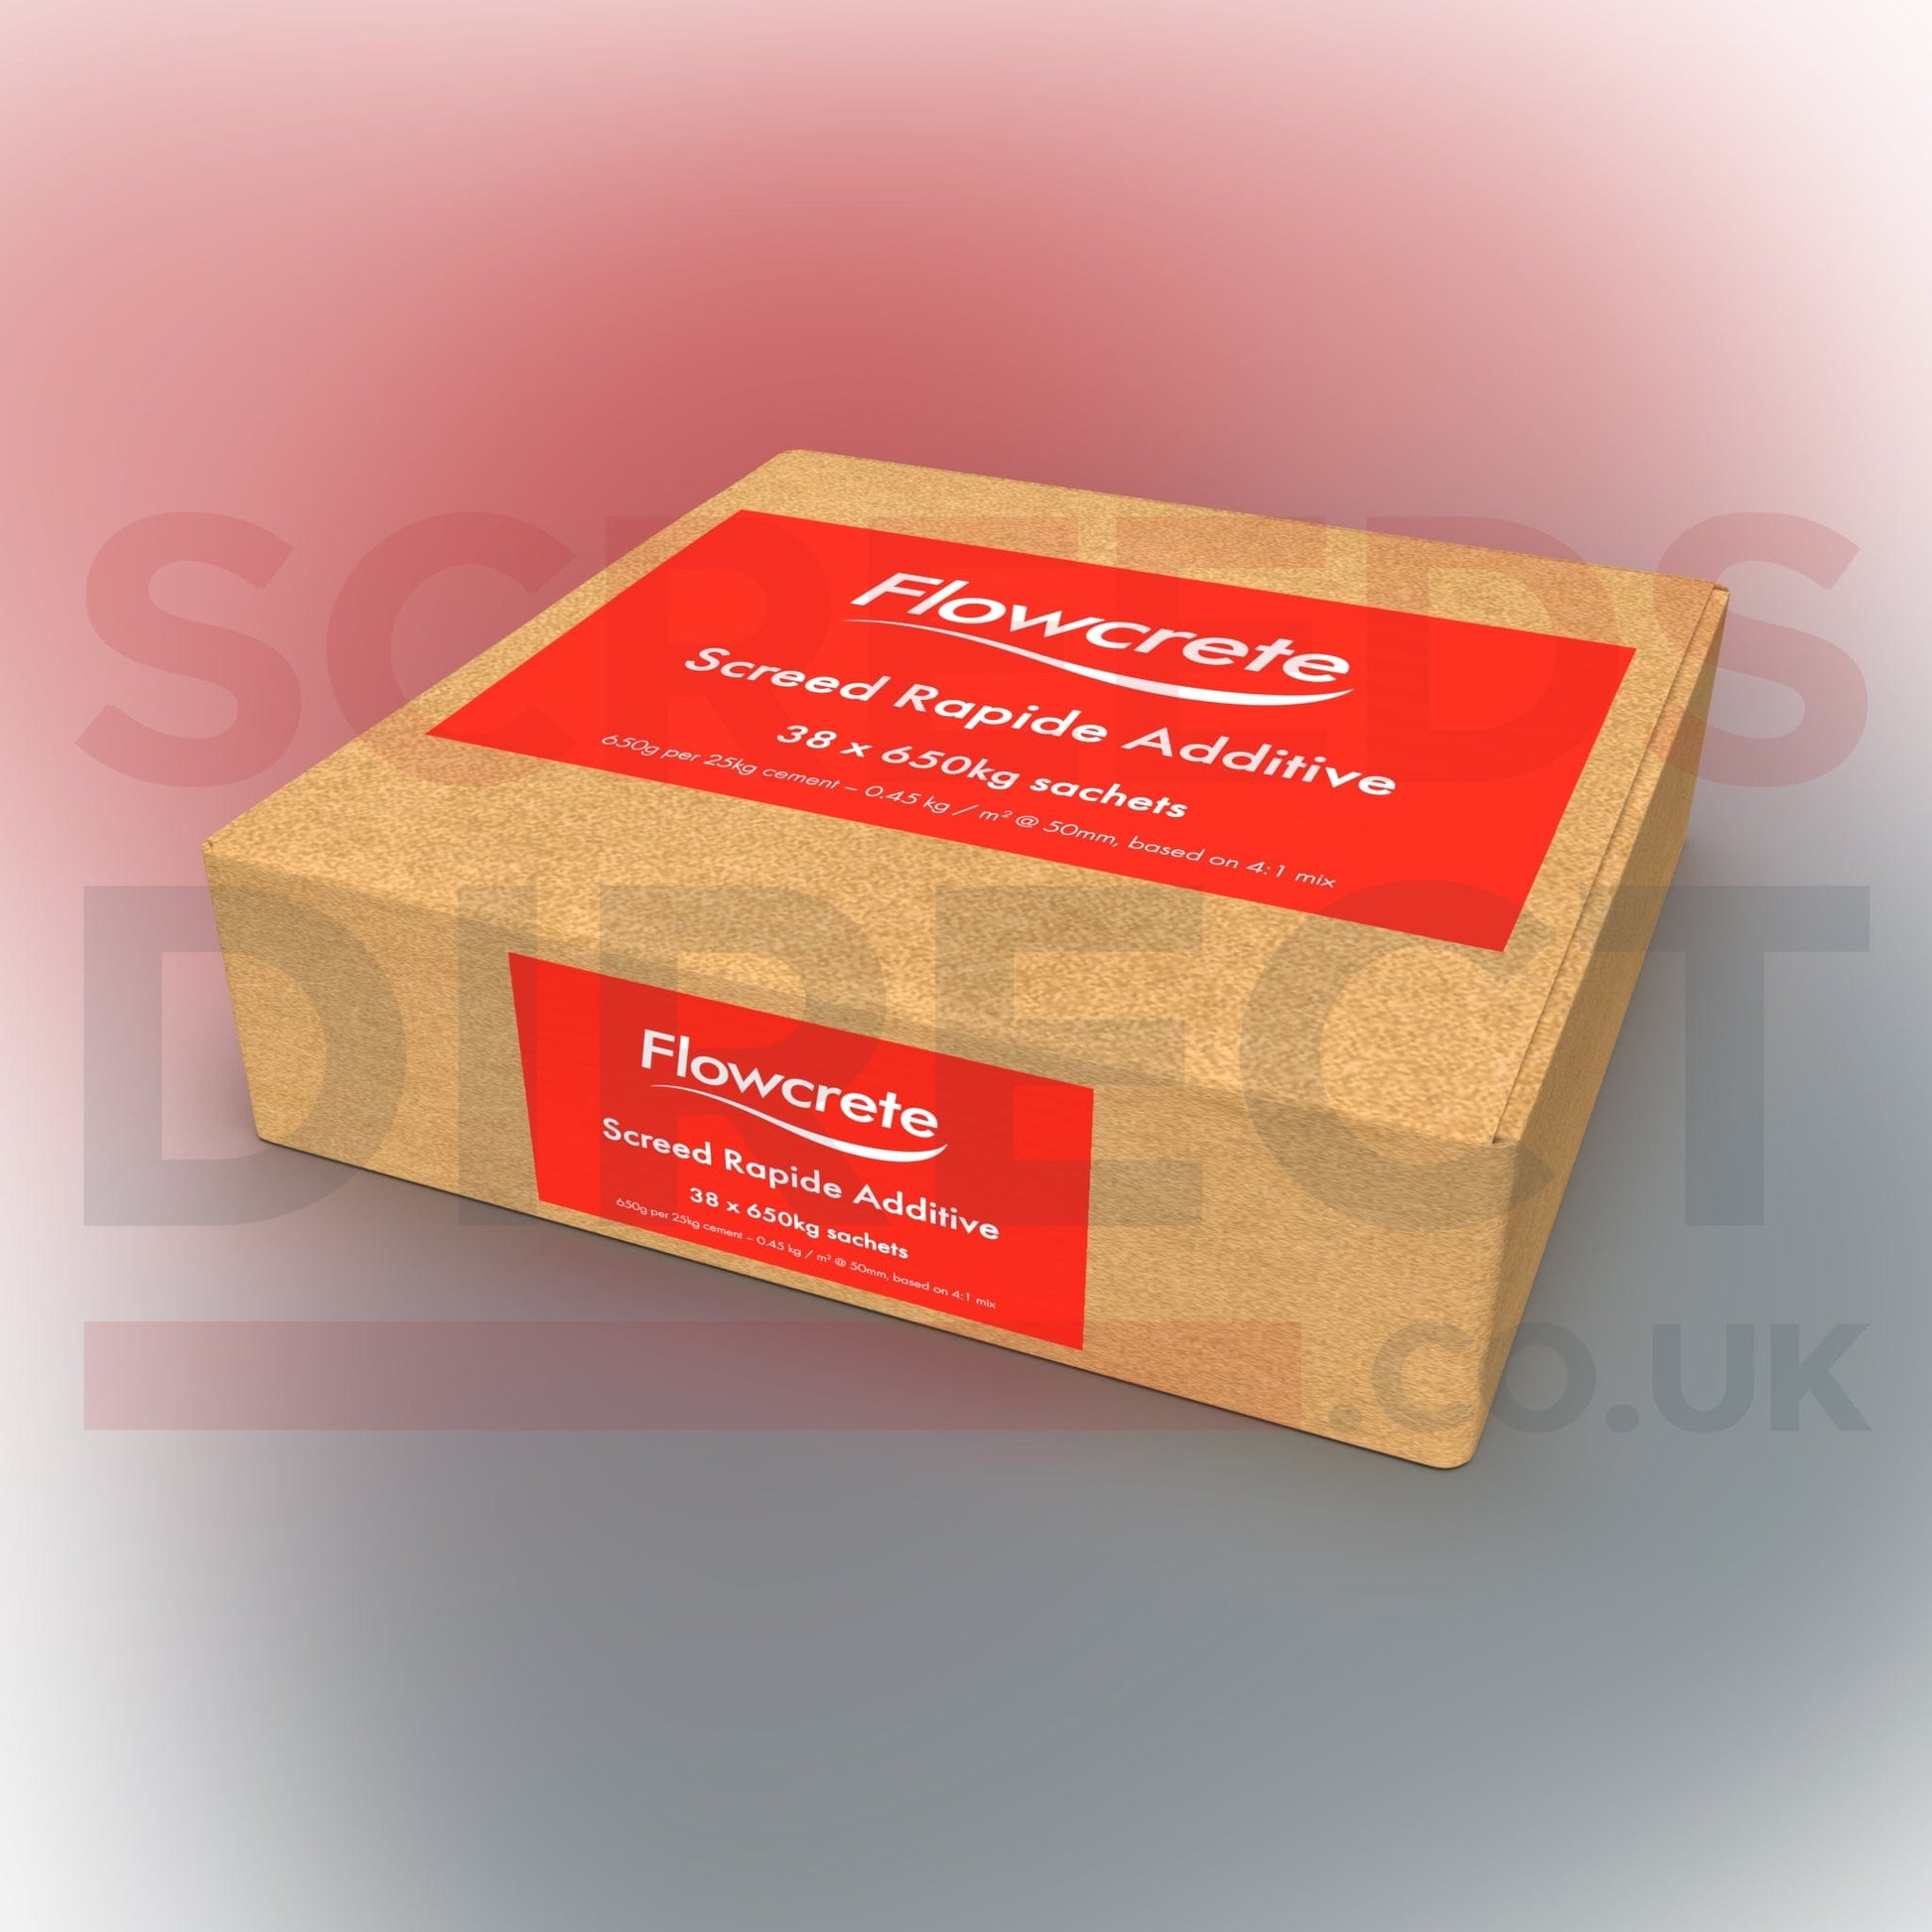 Flowcrete Fast Drying Cement Replacement Screeds Flowcrete Screed Rapide Additive – 25 Kg Box